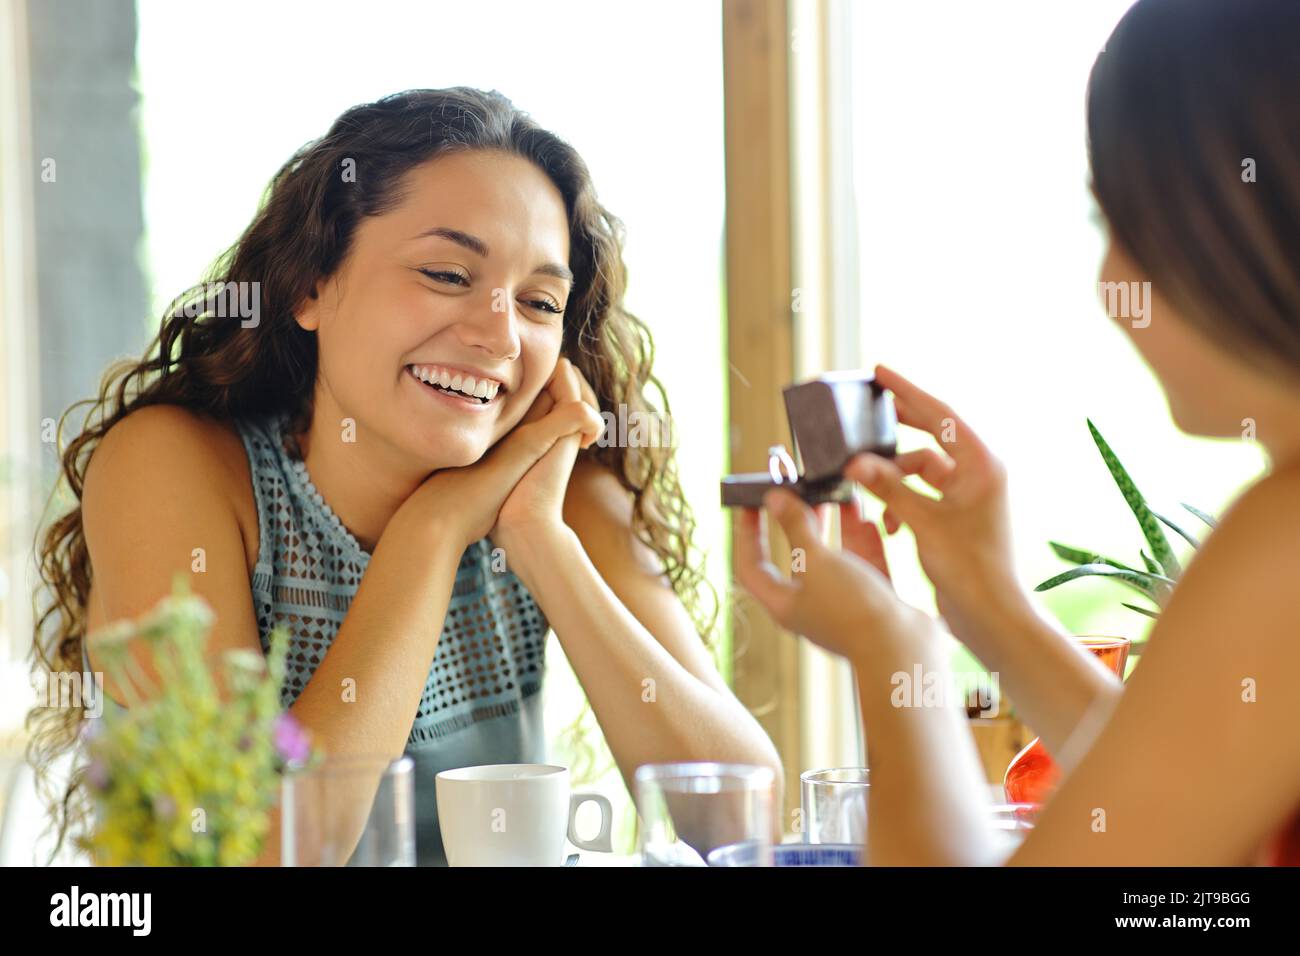 Marriage proposal of two happy lesbian women in a restaurant Stock Photo